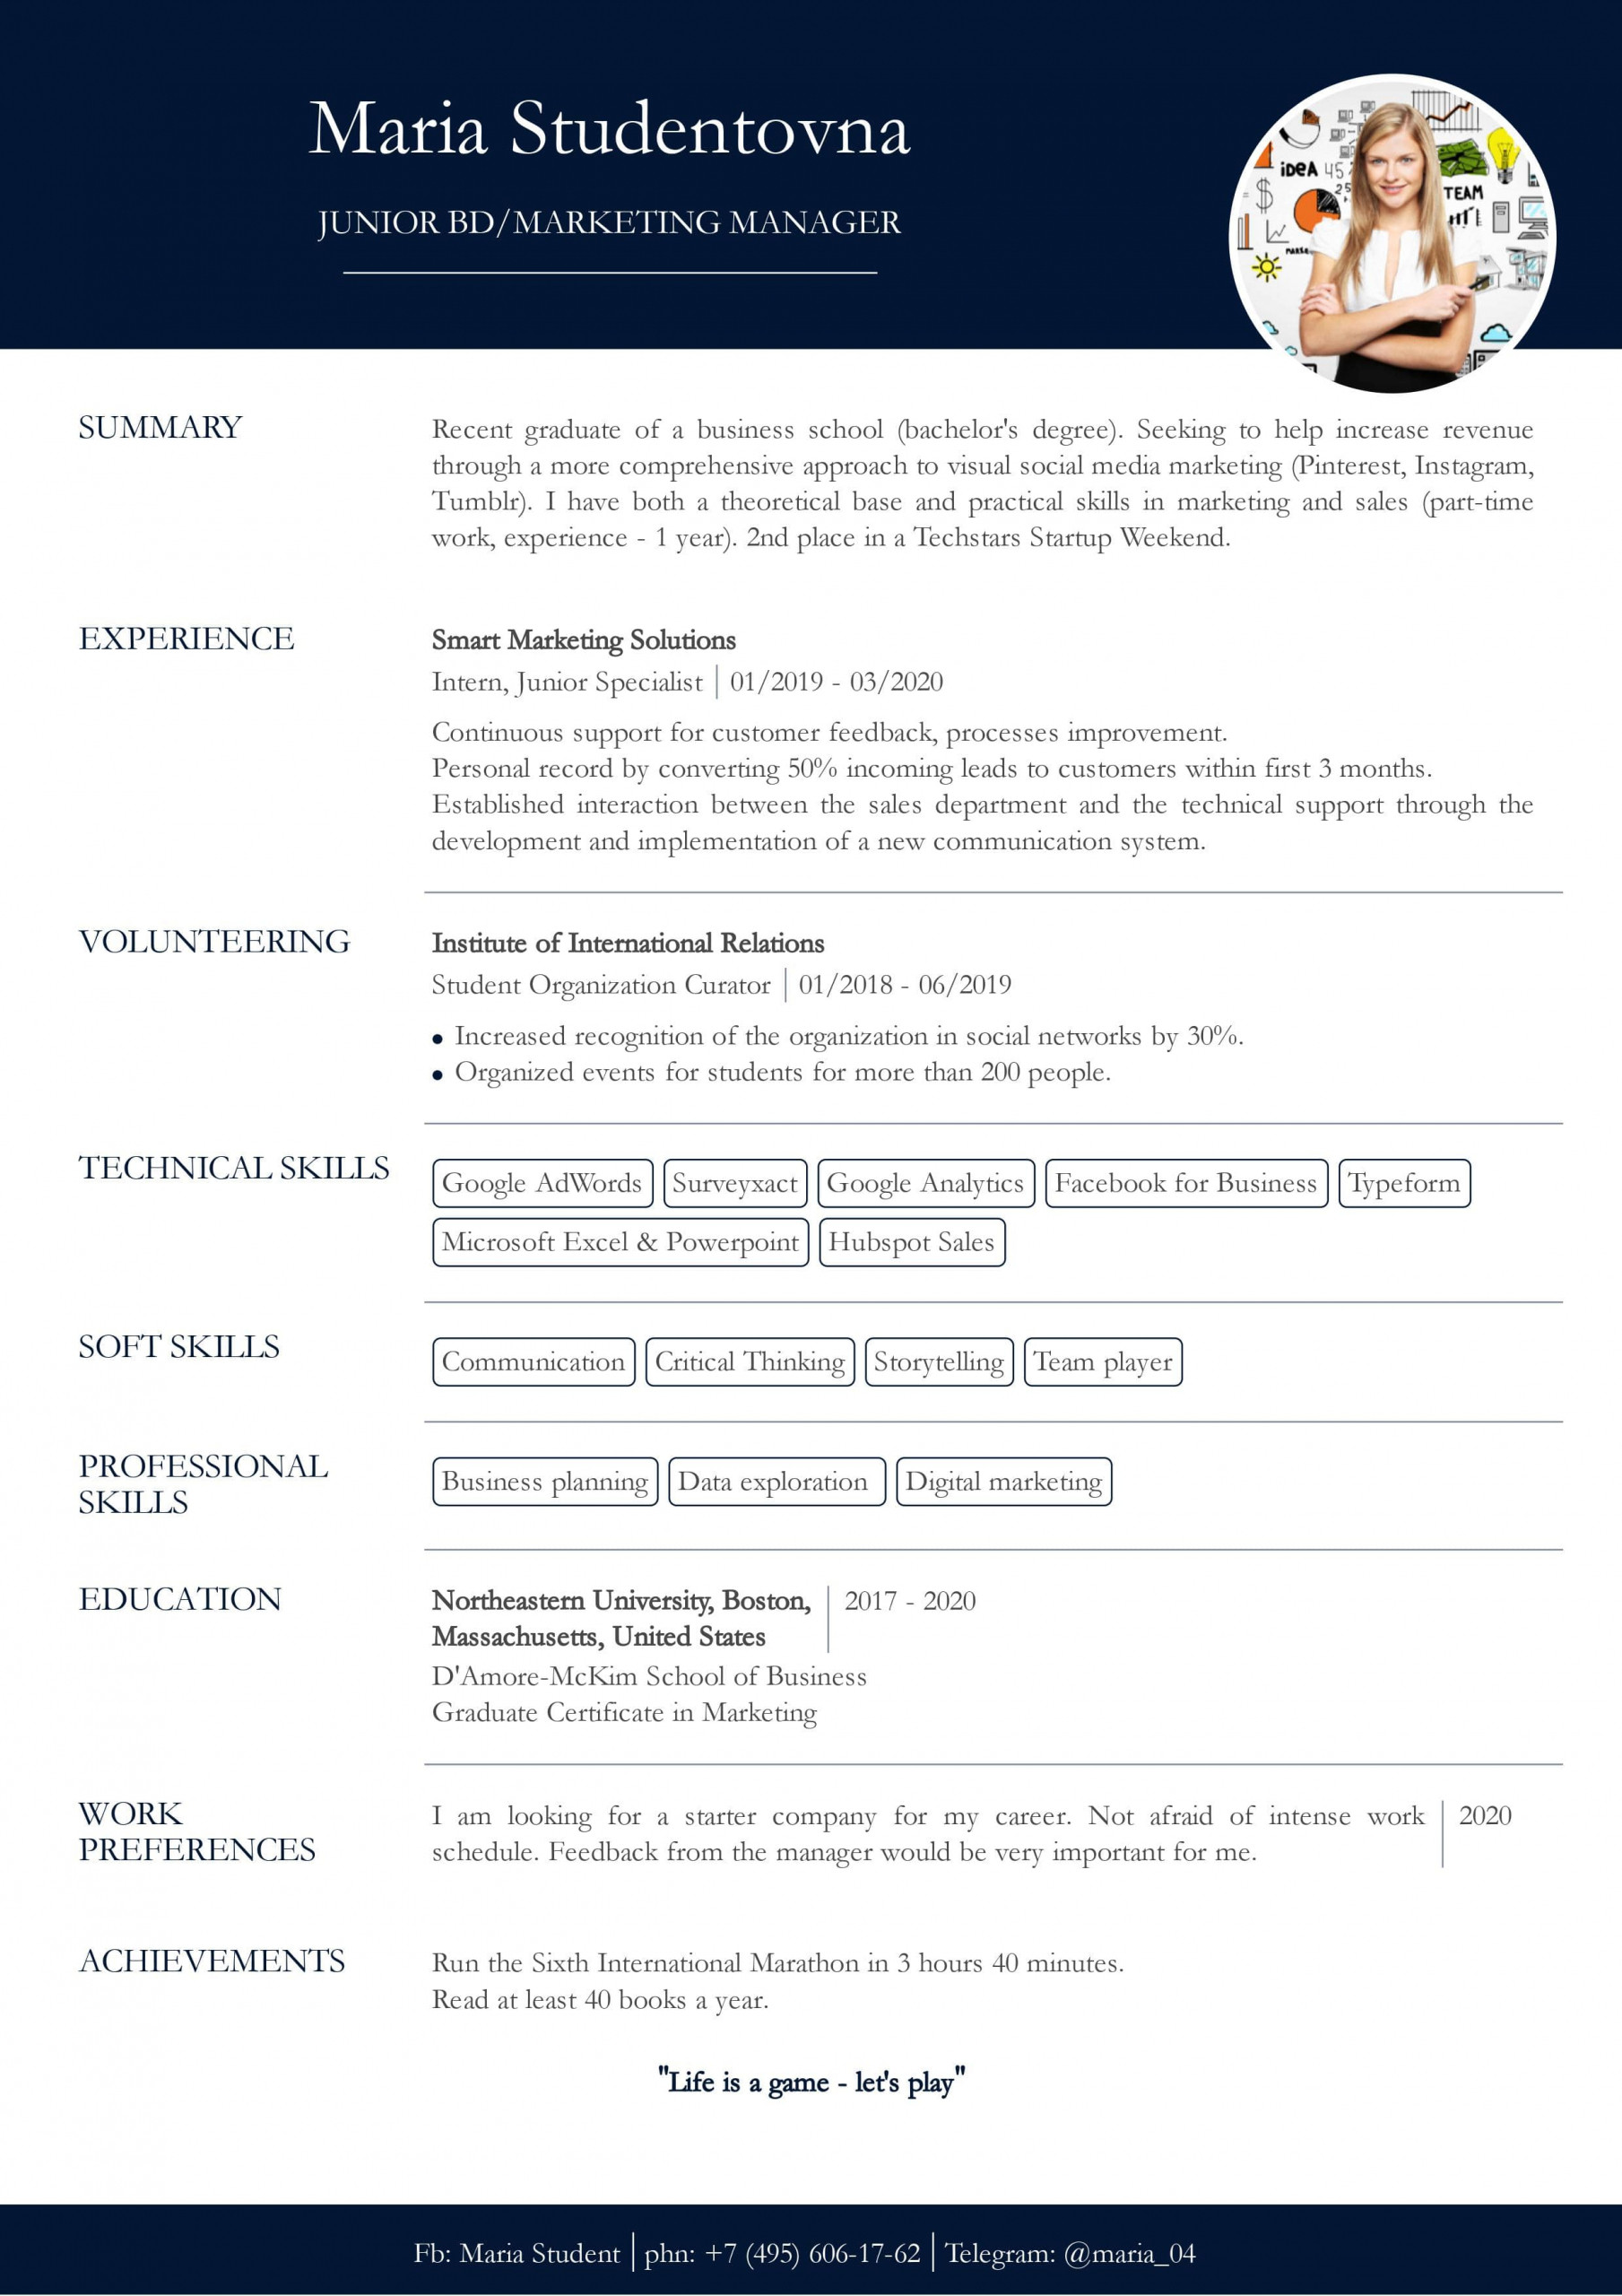 Sample Resume with Little or No Experience Resume with No Work Experience. Sample for Students. – Cv2you Blog